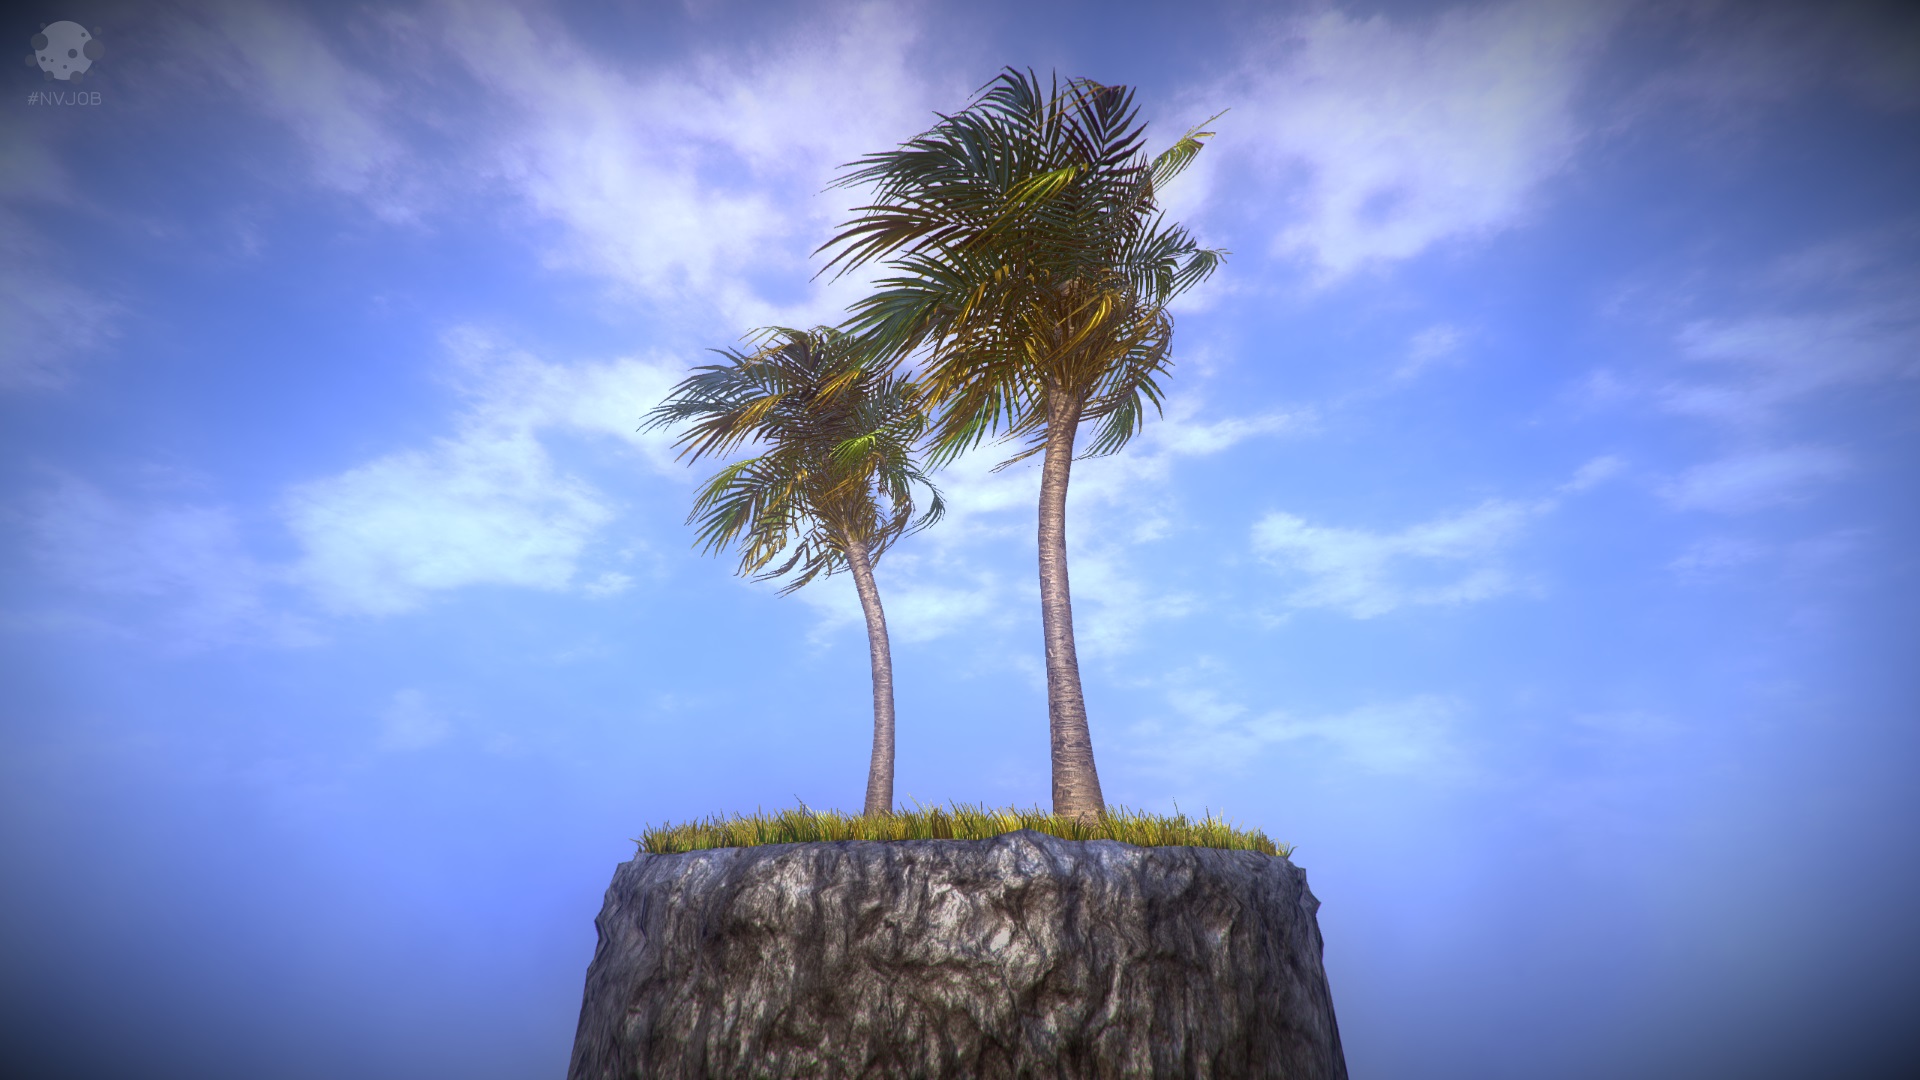 STC8 (Advanced Shader for Unity SpeedTree 8). Unity Free Asset.